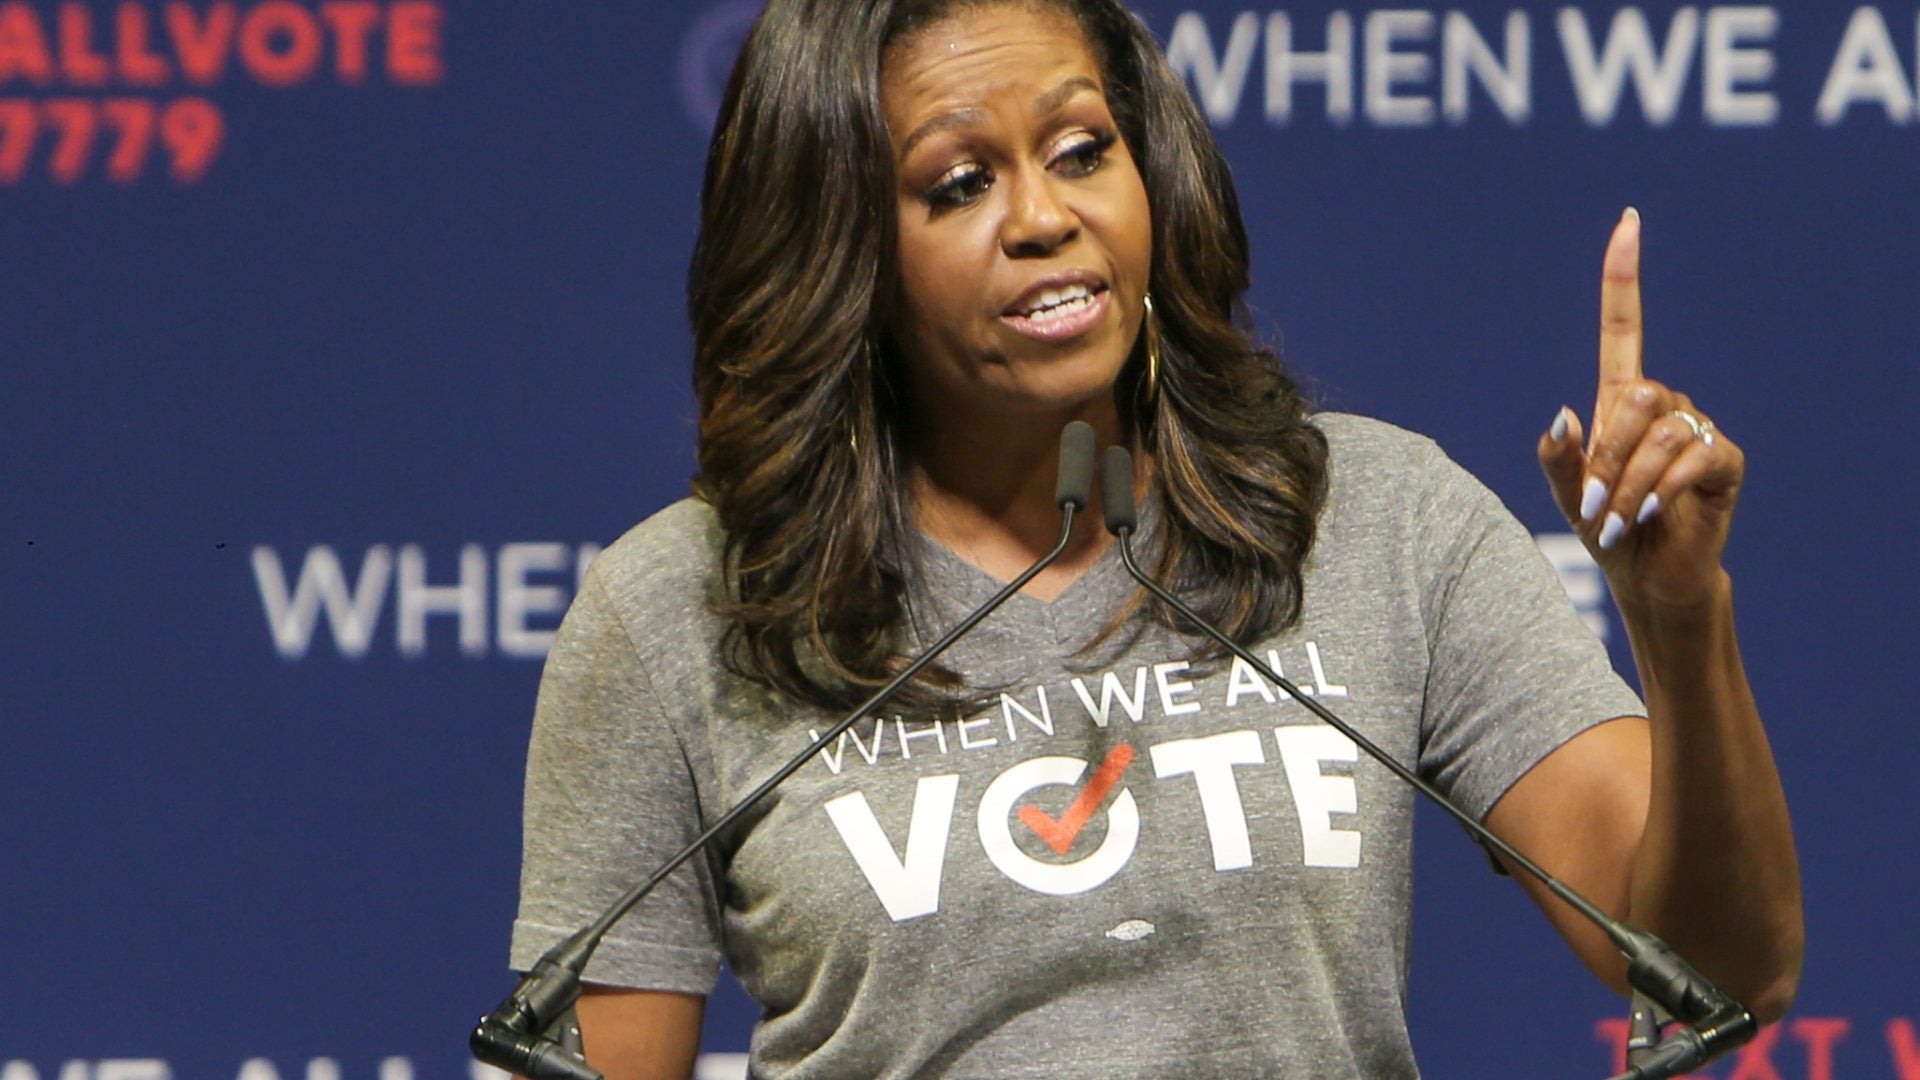 Michelle Obama Is Going To 'The D' To Help Get Out The Vote